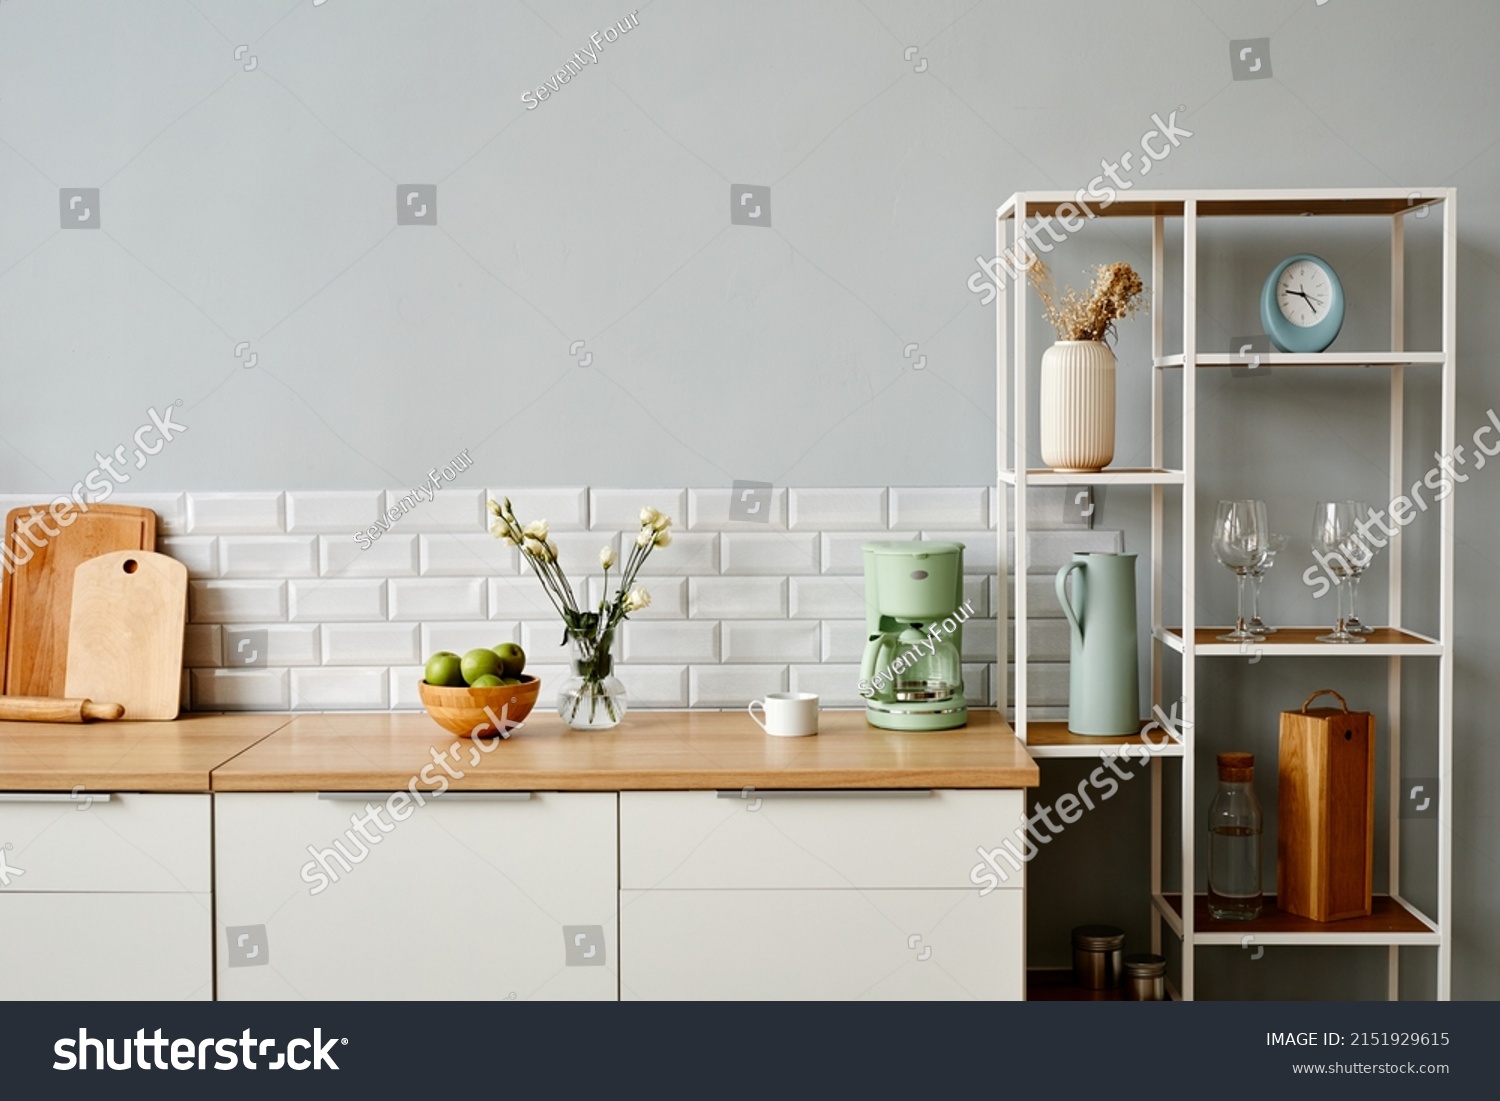 Stock Photo Minimal Background Image Of White Kitchen Interior With Open Shelves Copy Space 2151929615 